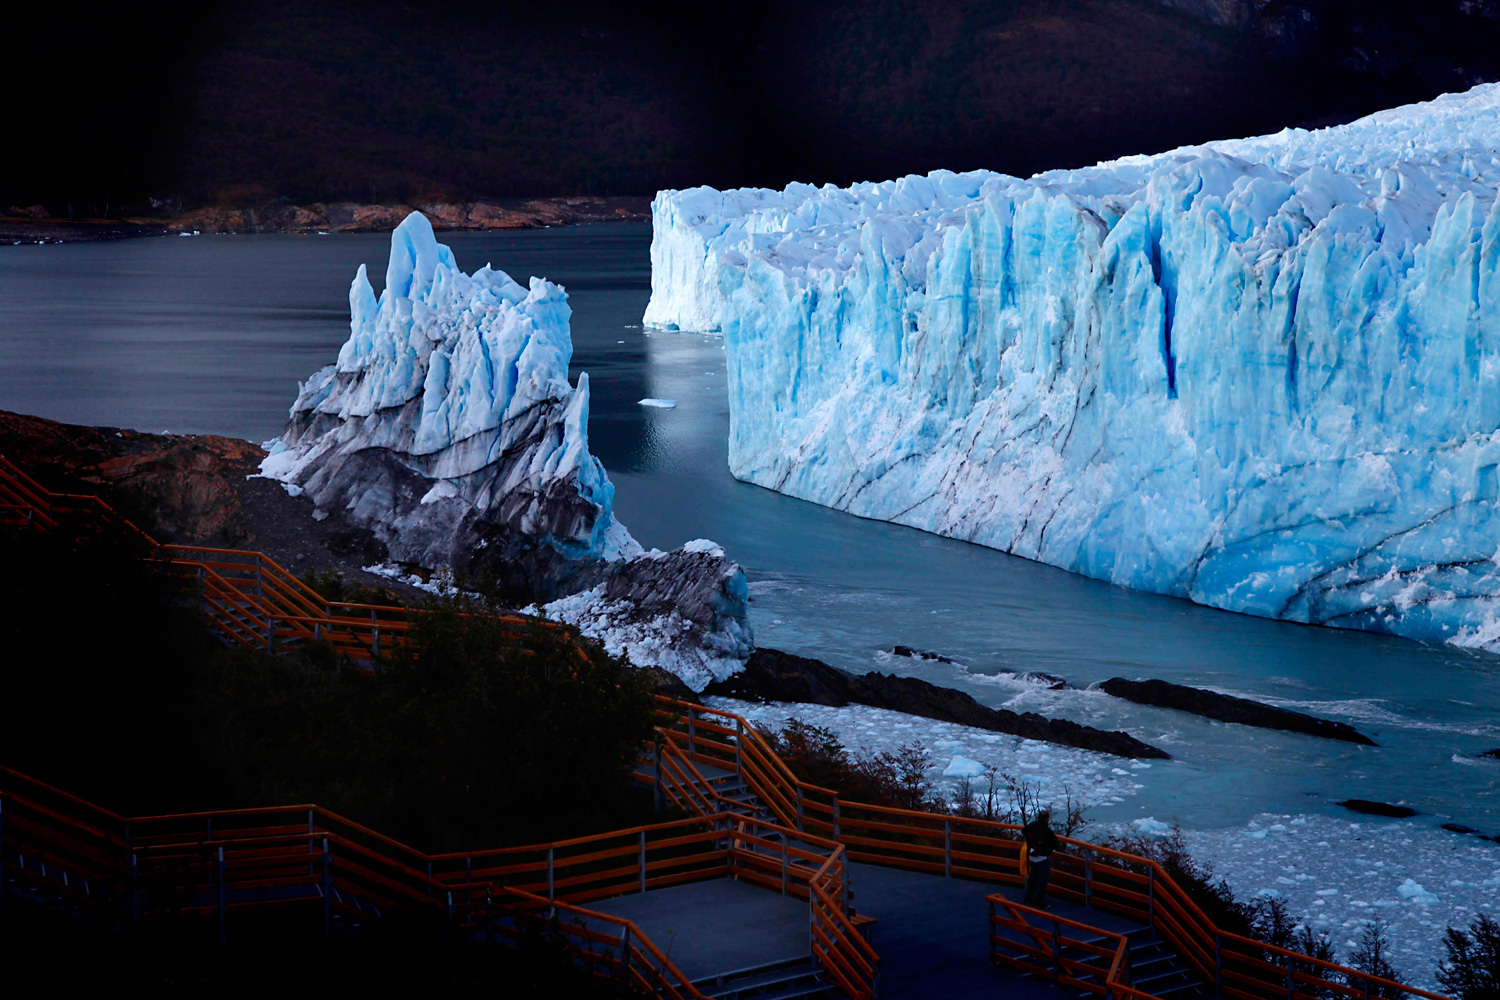 March 4, 2012. The Perito Moreno glacier is seen after the rupture of a massive ice wall near the city of El Calafate in the Patagonian province of Santa Cruz, Argentina.